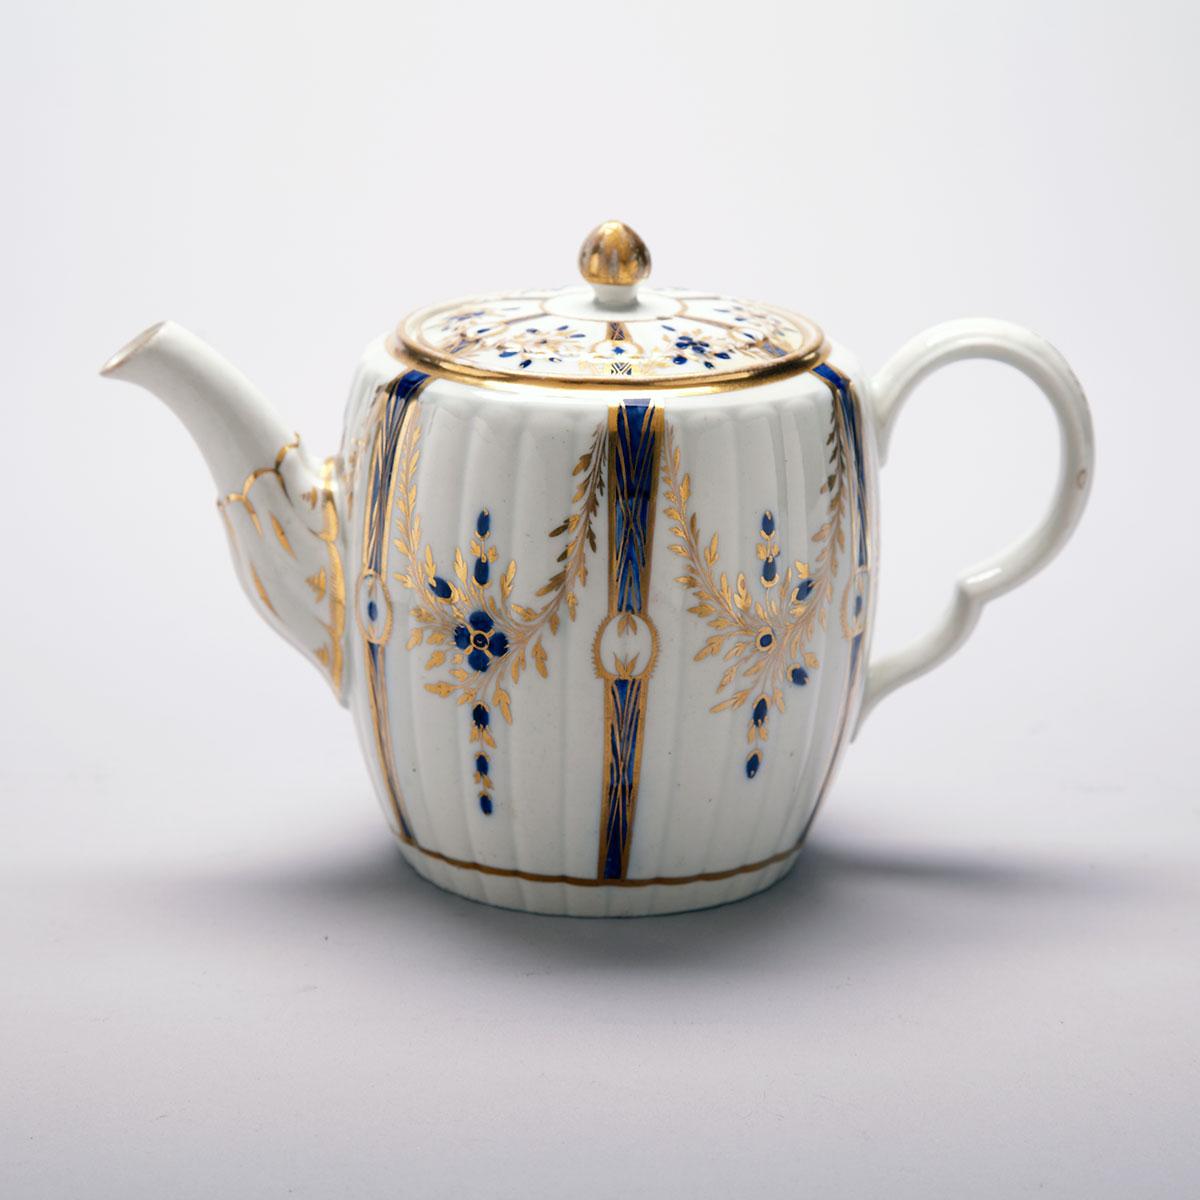 Caughley Fluted Teapot, c.1780